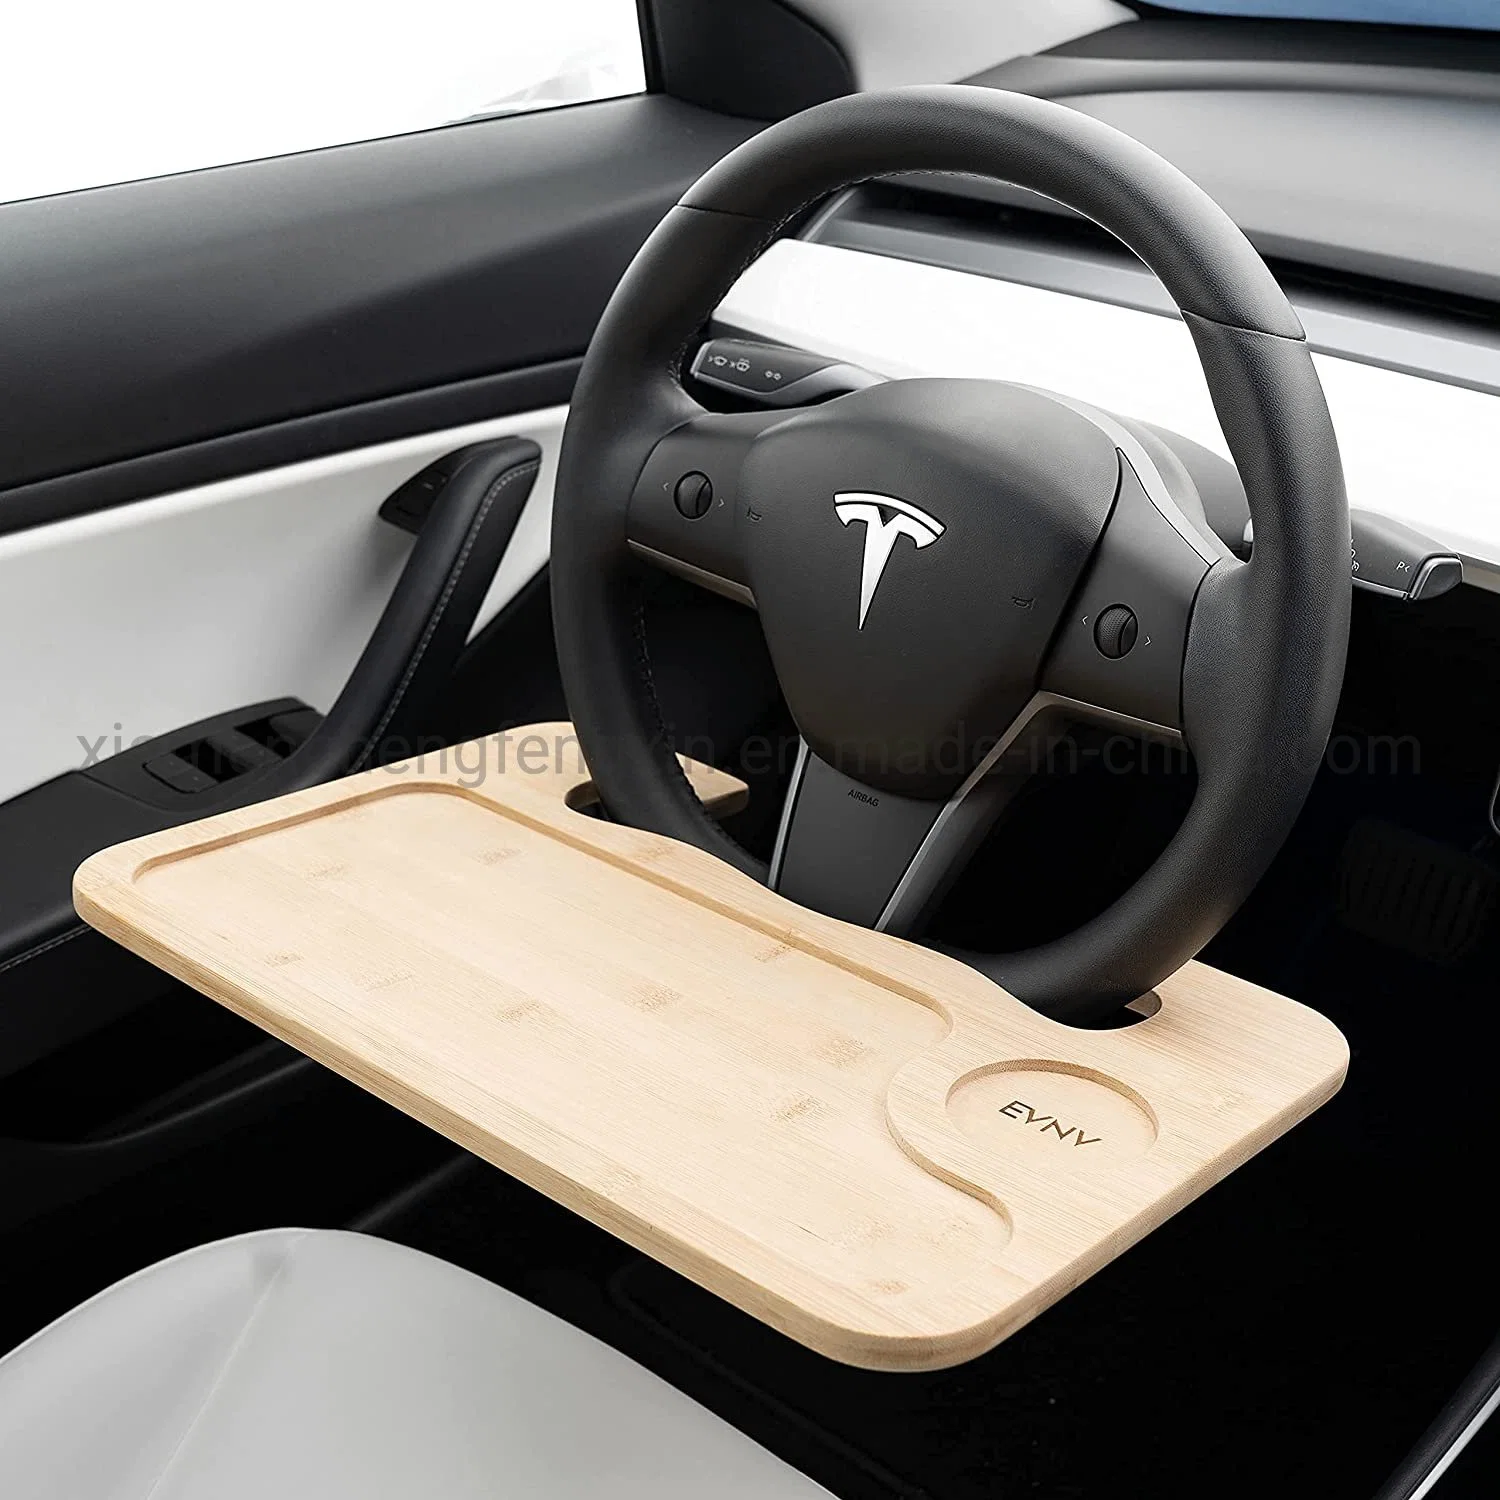 Steering Wheel Tray - Eat Lunch Comfortably in Your Car - Car Laptop Desk for Working Remotely - Fits Most Cars Including Tesla Model